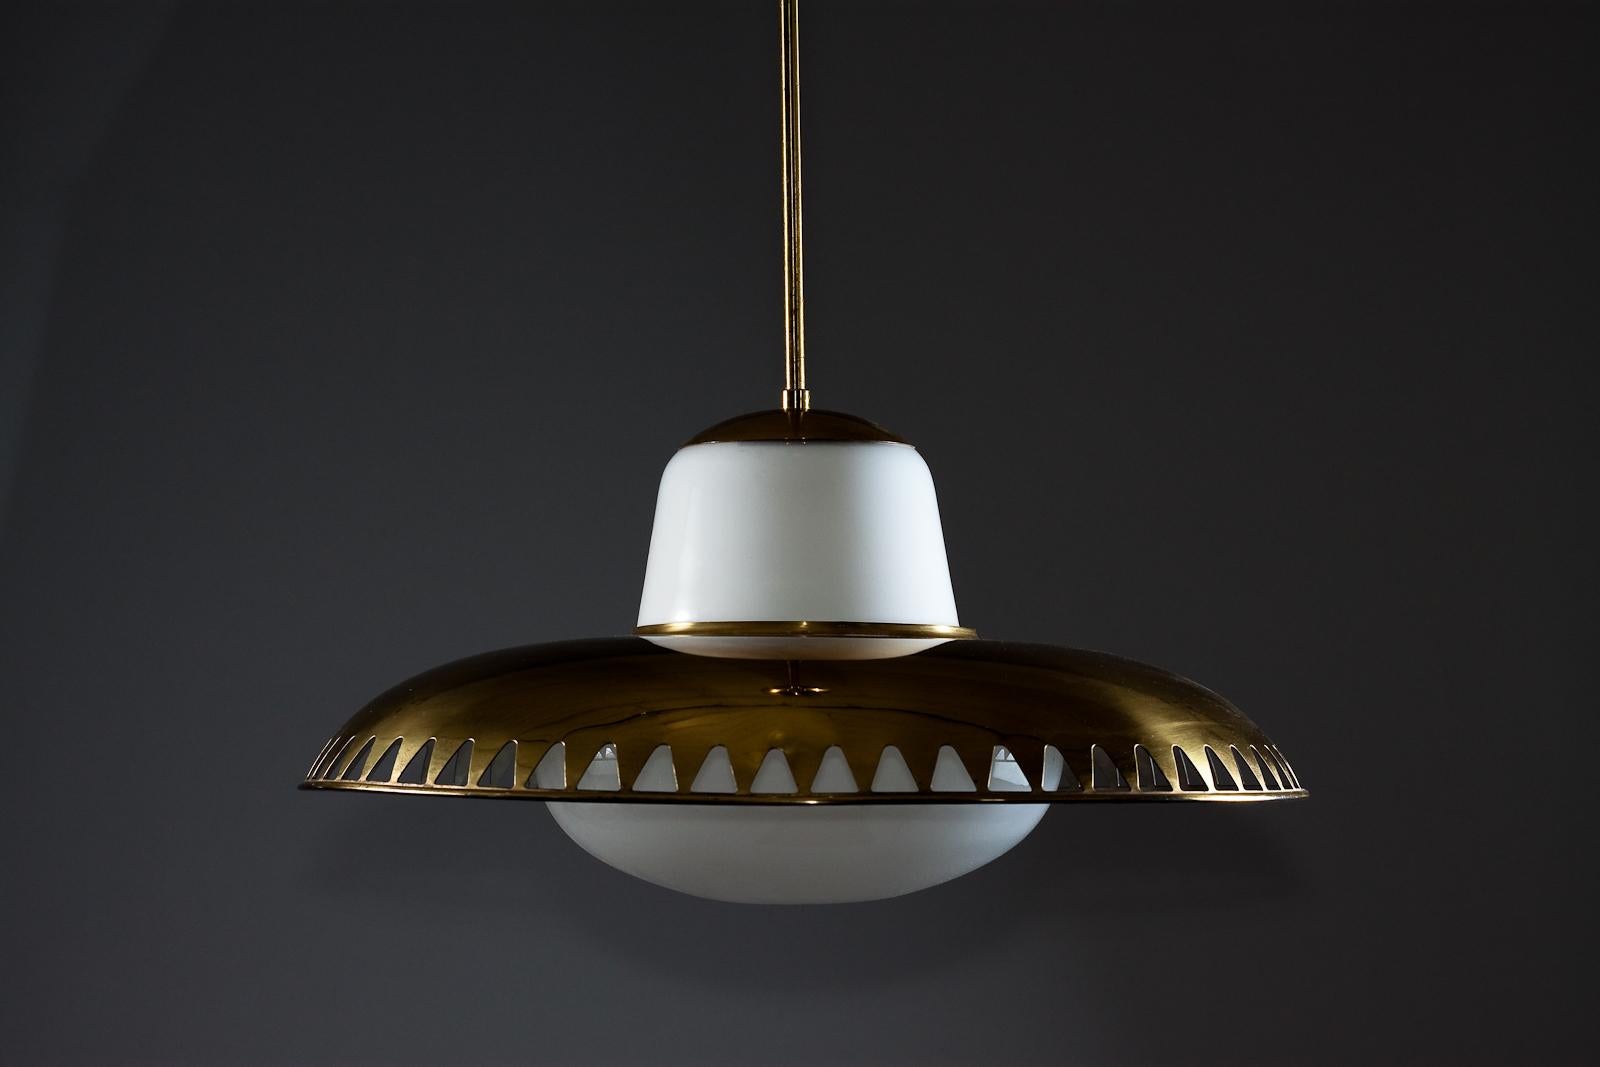 This stunning Lisa Johansson-Pape pendant is a perfect addition to any vintage design lighting collection. The decorative brass pendant features a beautiful glass design by Gunilla Jung, and the brass lamp shade is designed by Lisa